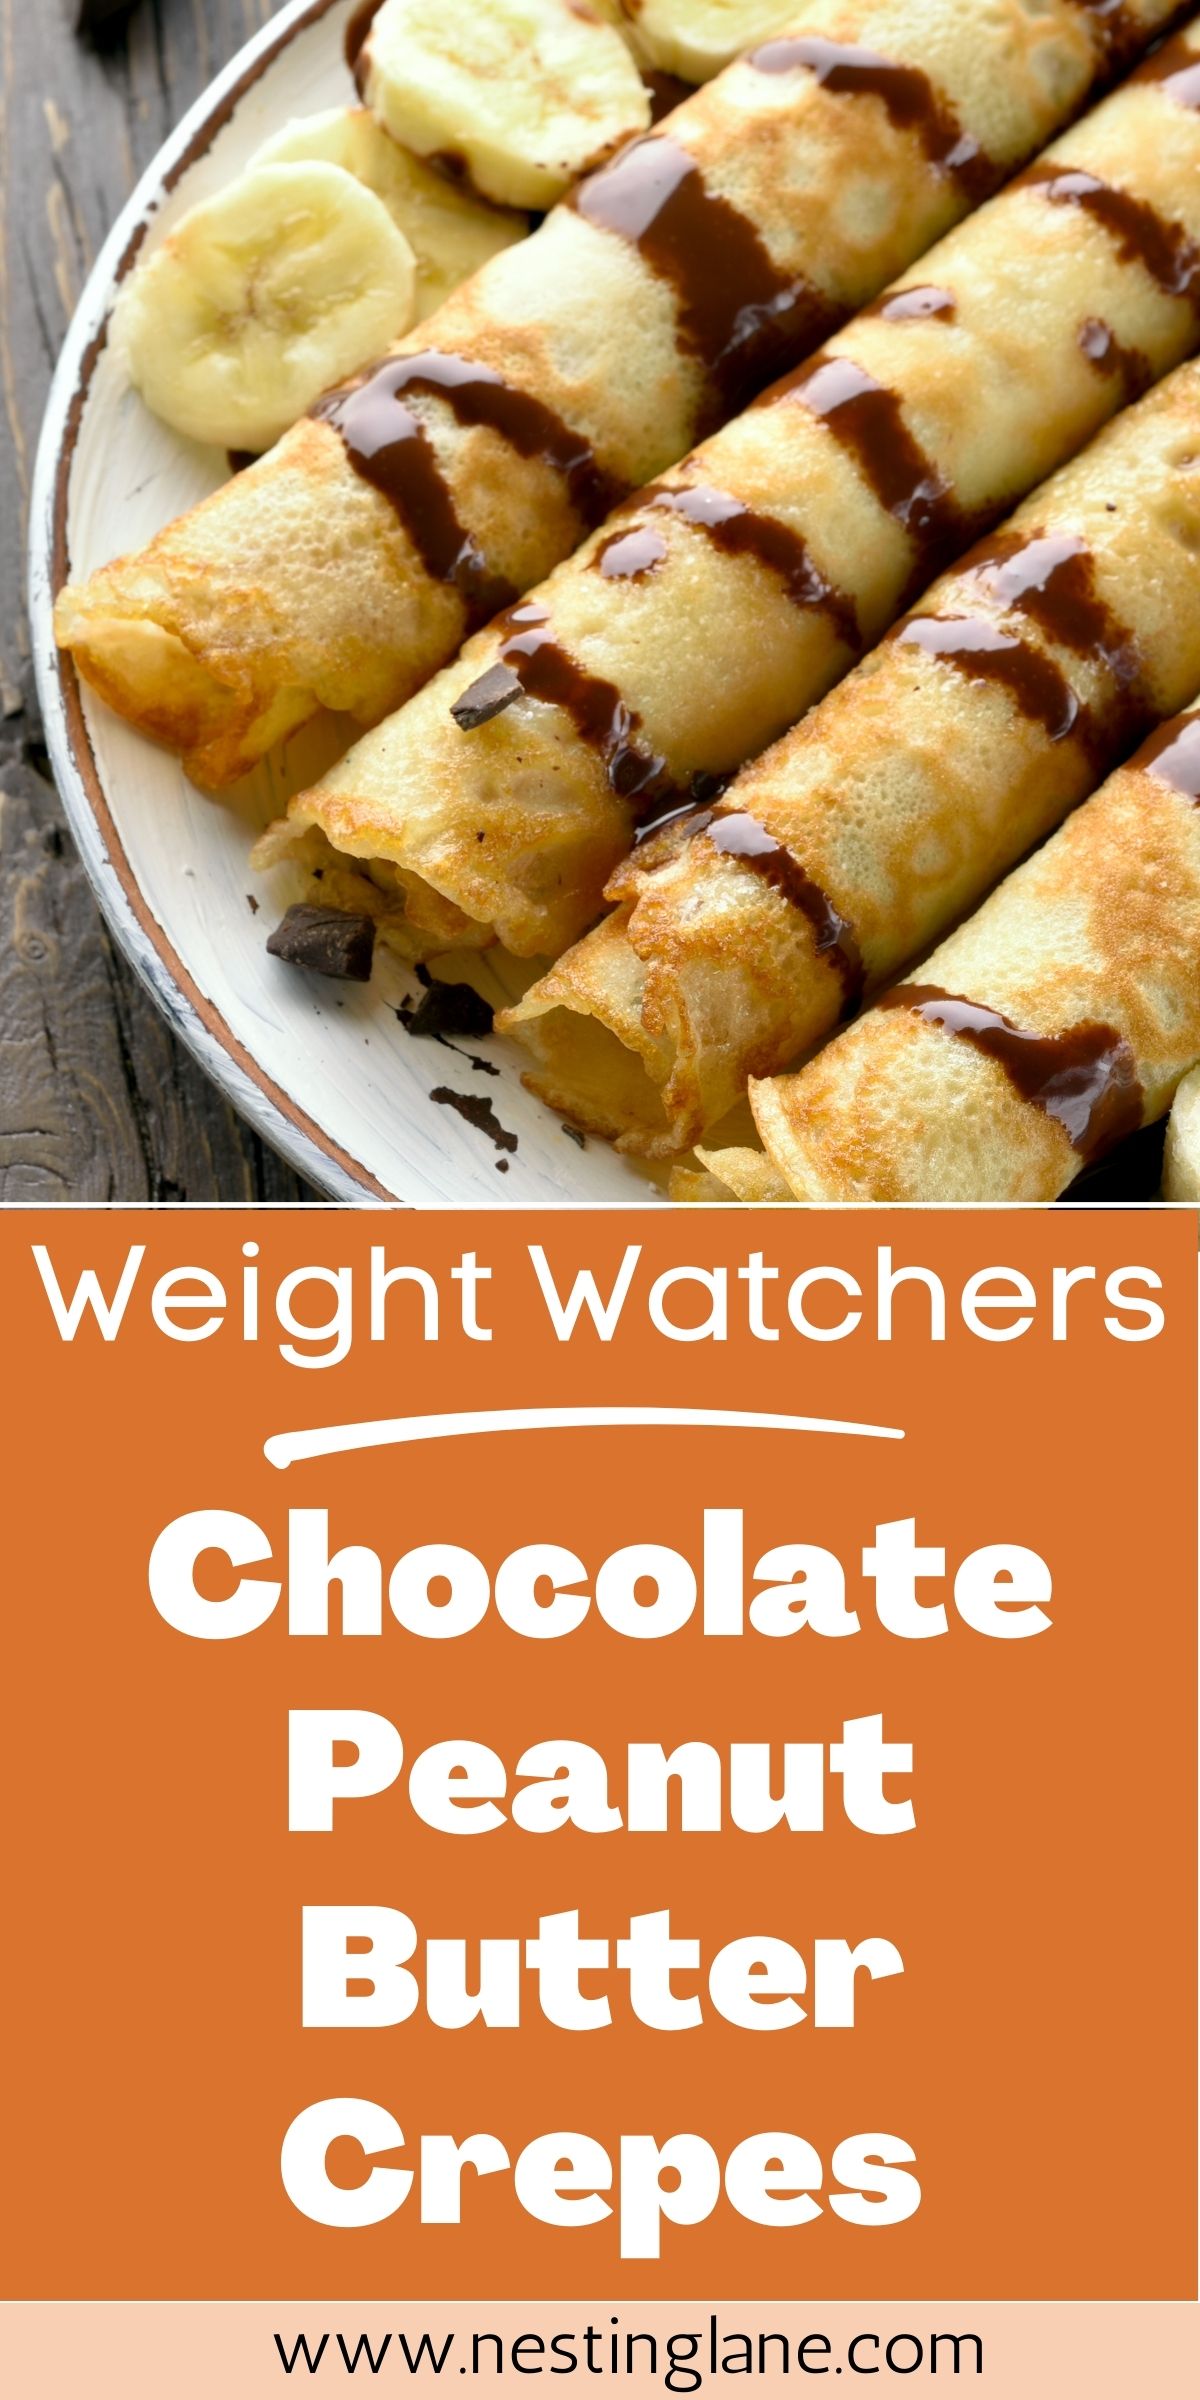 Graphic for Pinterest of Weight Watchers Chocolate Peanut Butter Crepes Recipe.